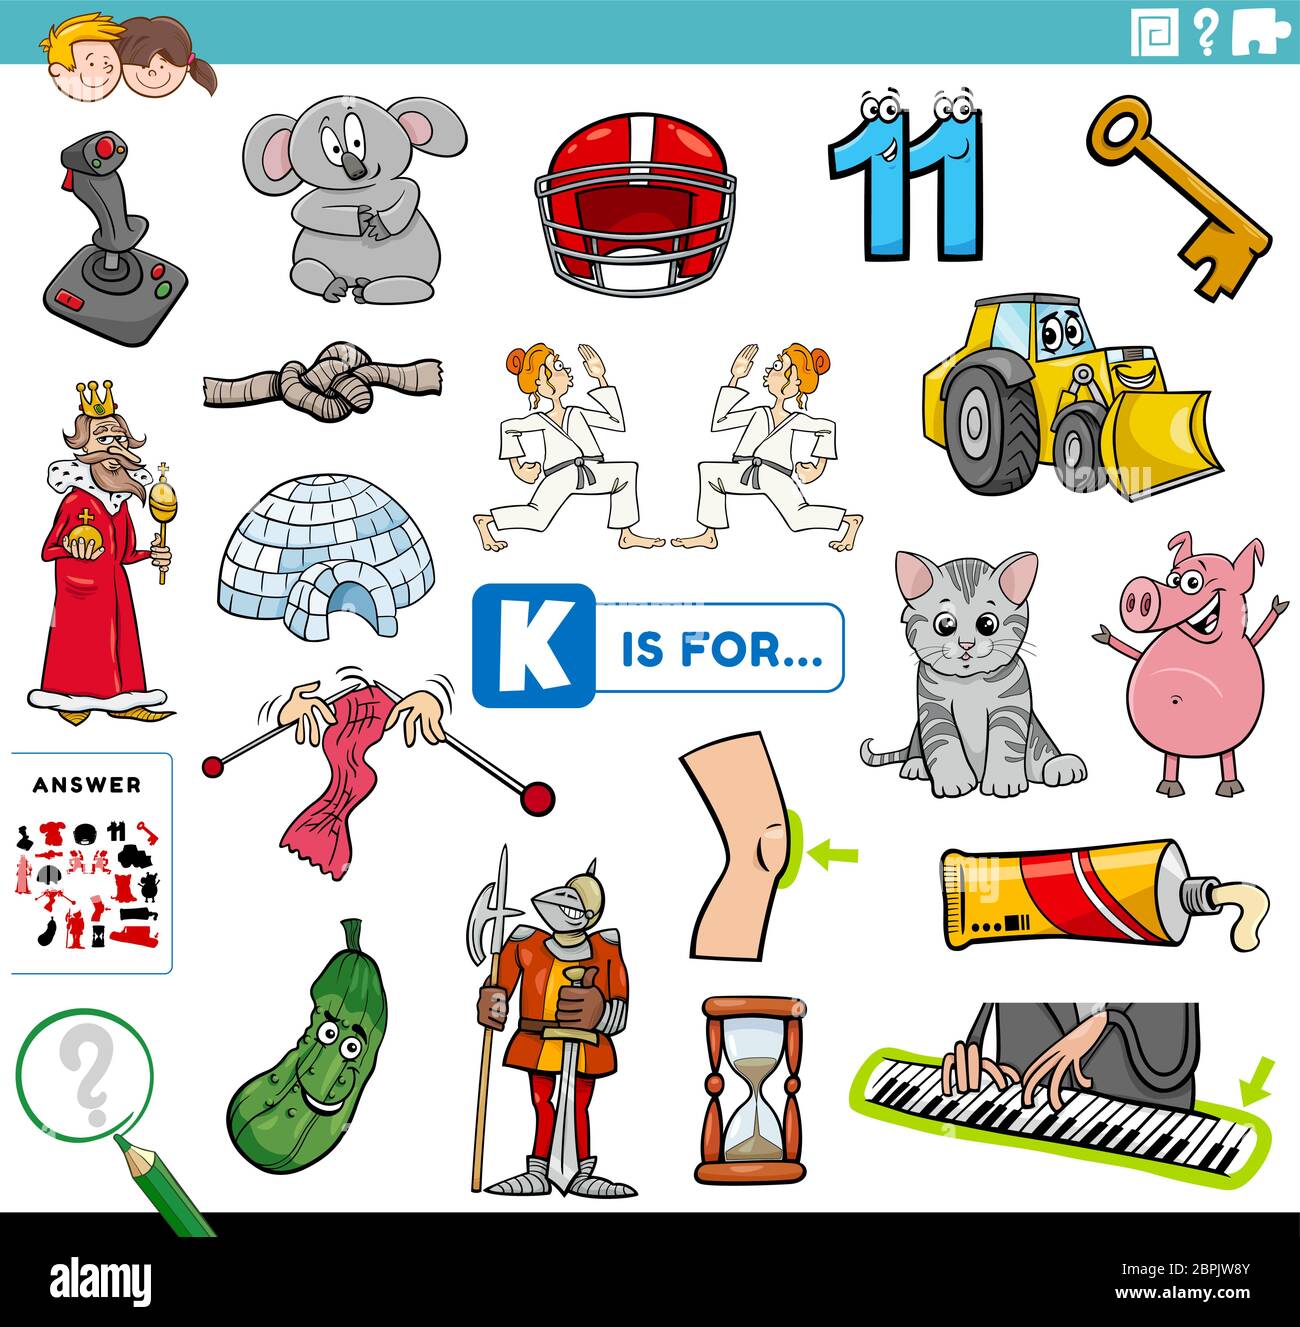 Cartoon Illustration of Finding Picture Starting with Letter K Educational Task Worksheet for Children with Objects and Characters Stock Vector